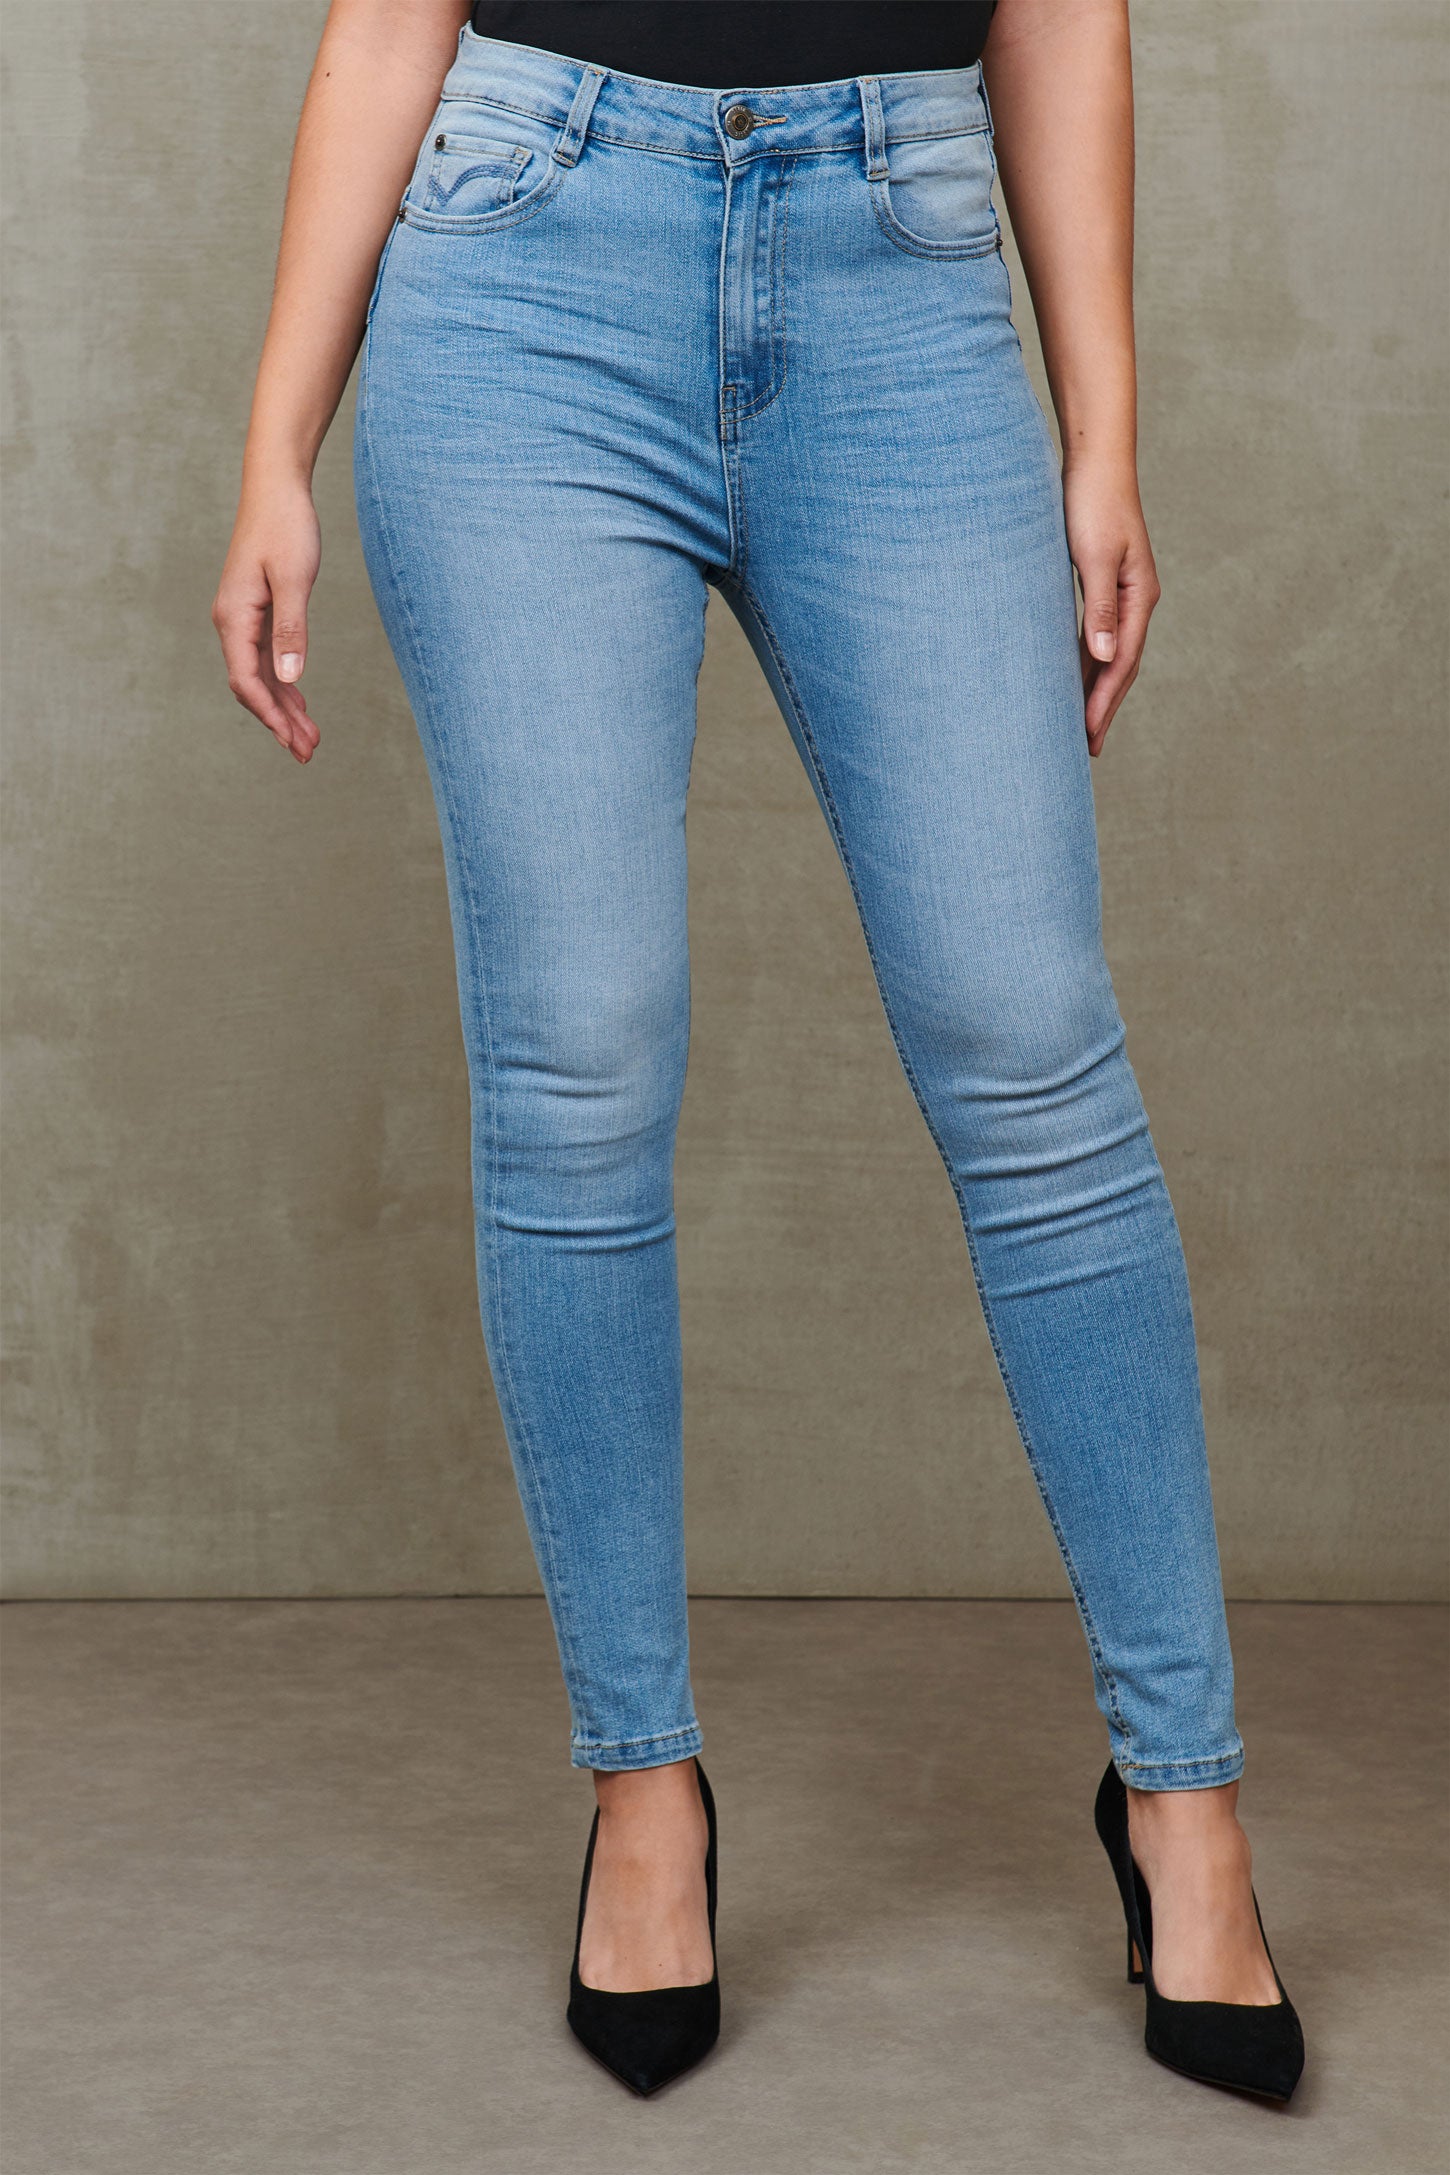 Pushup skinny high waisted jeans - Women